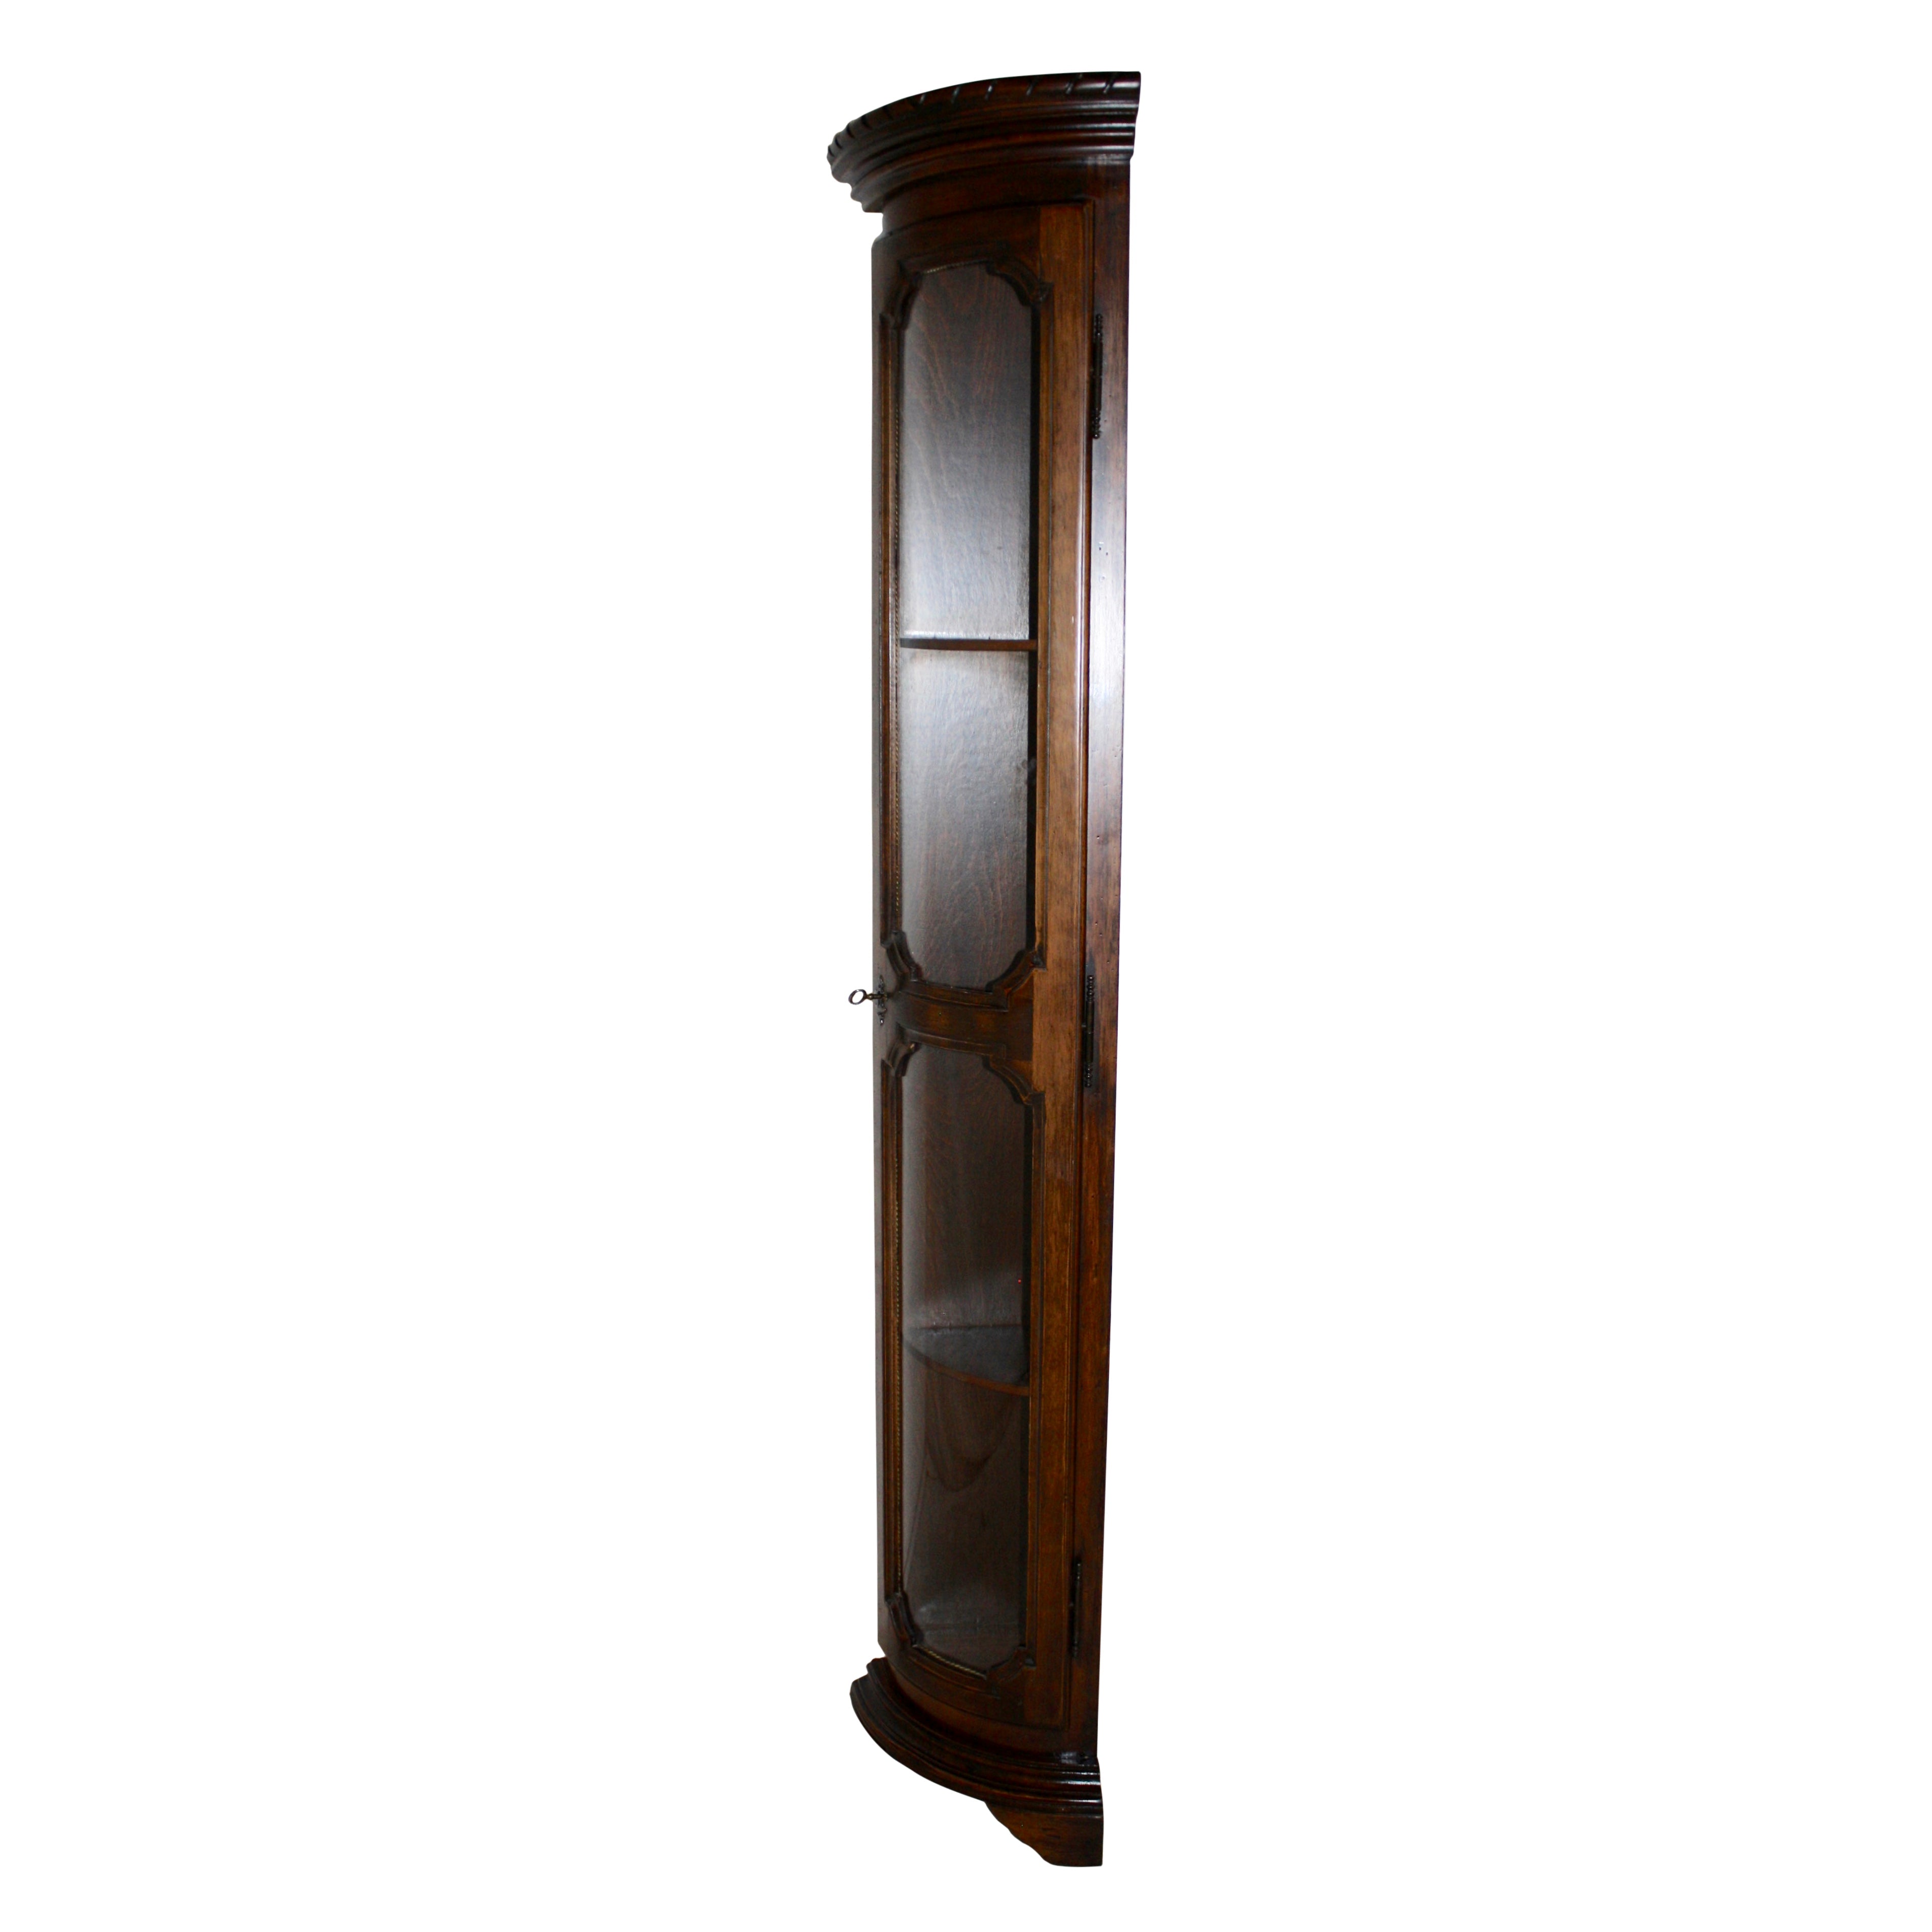 Narrow Italian Corner Cabinet with Bowed Glass Front